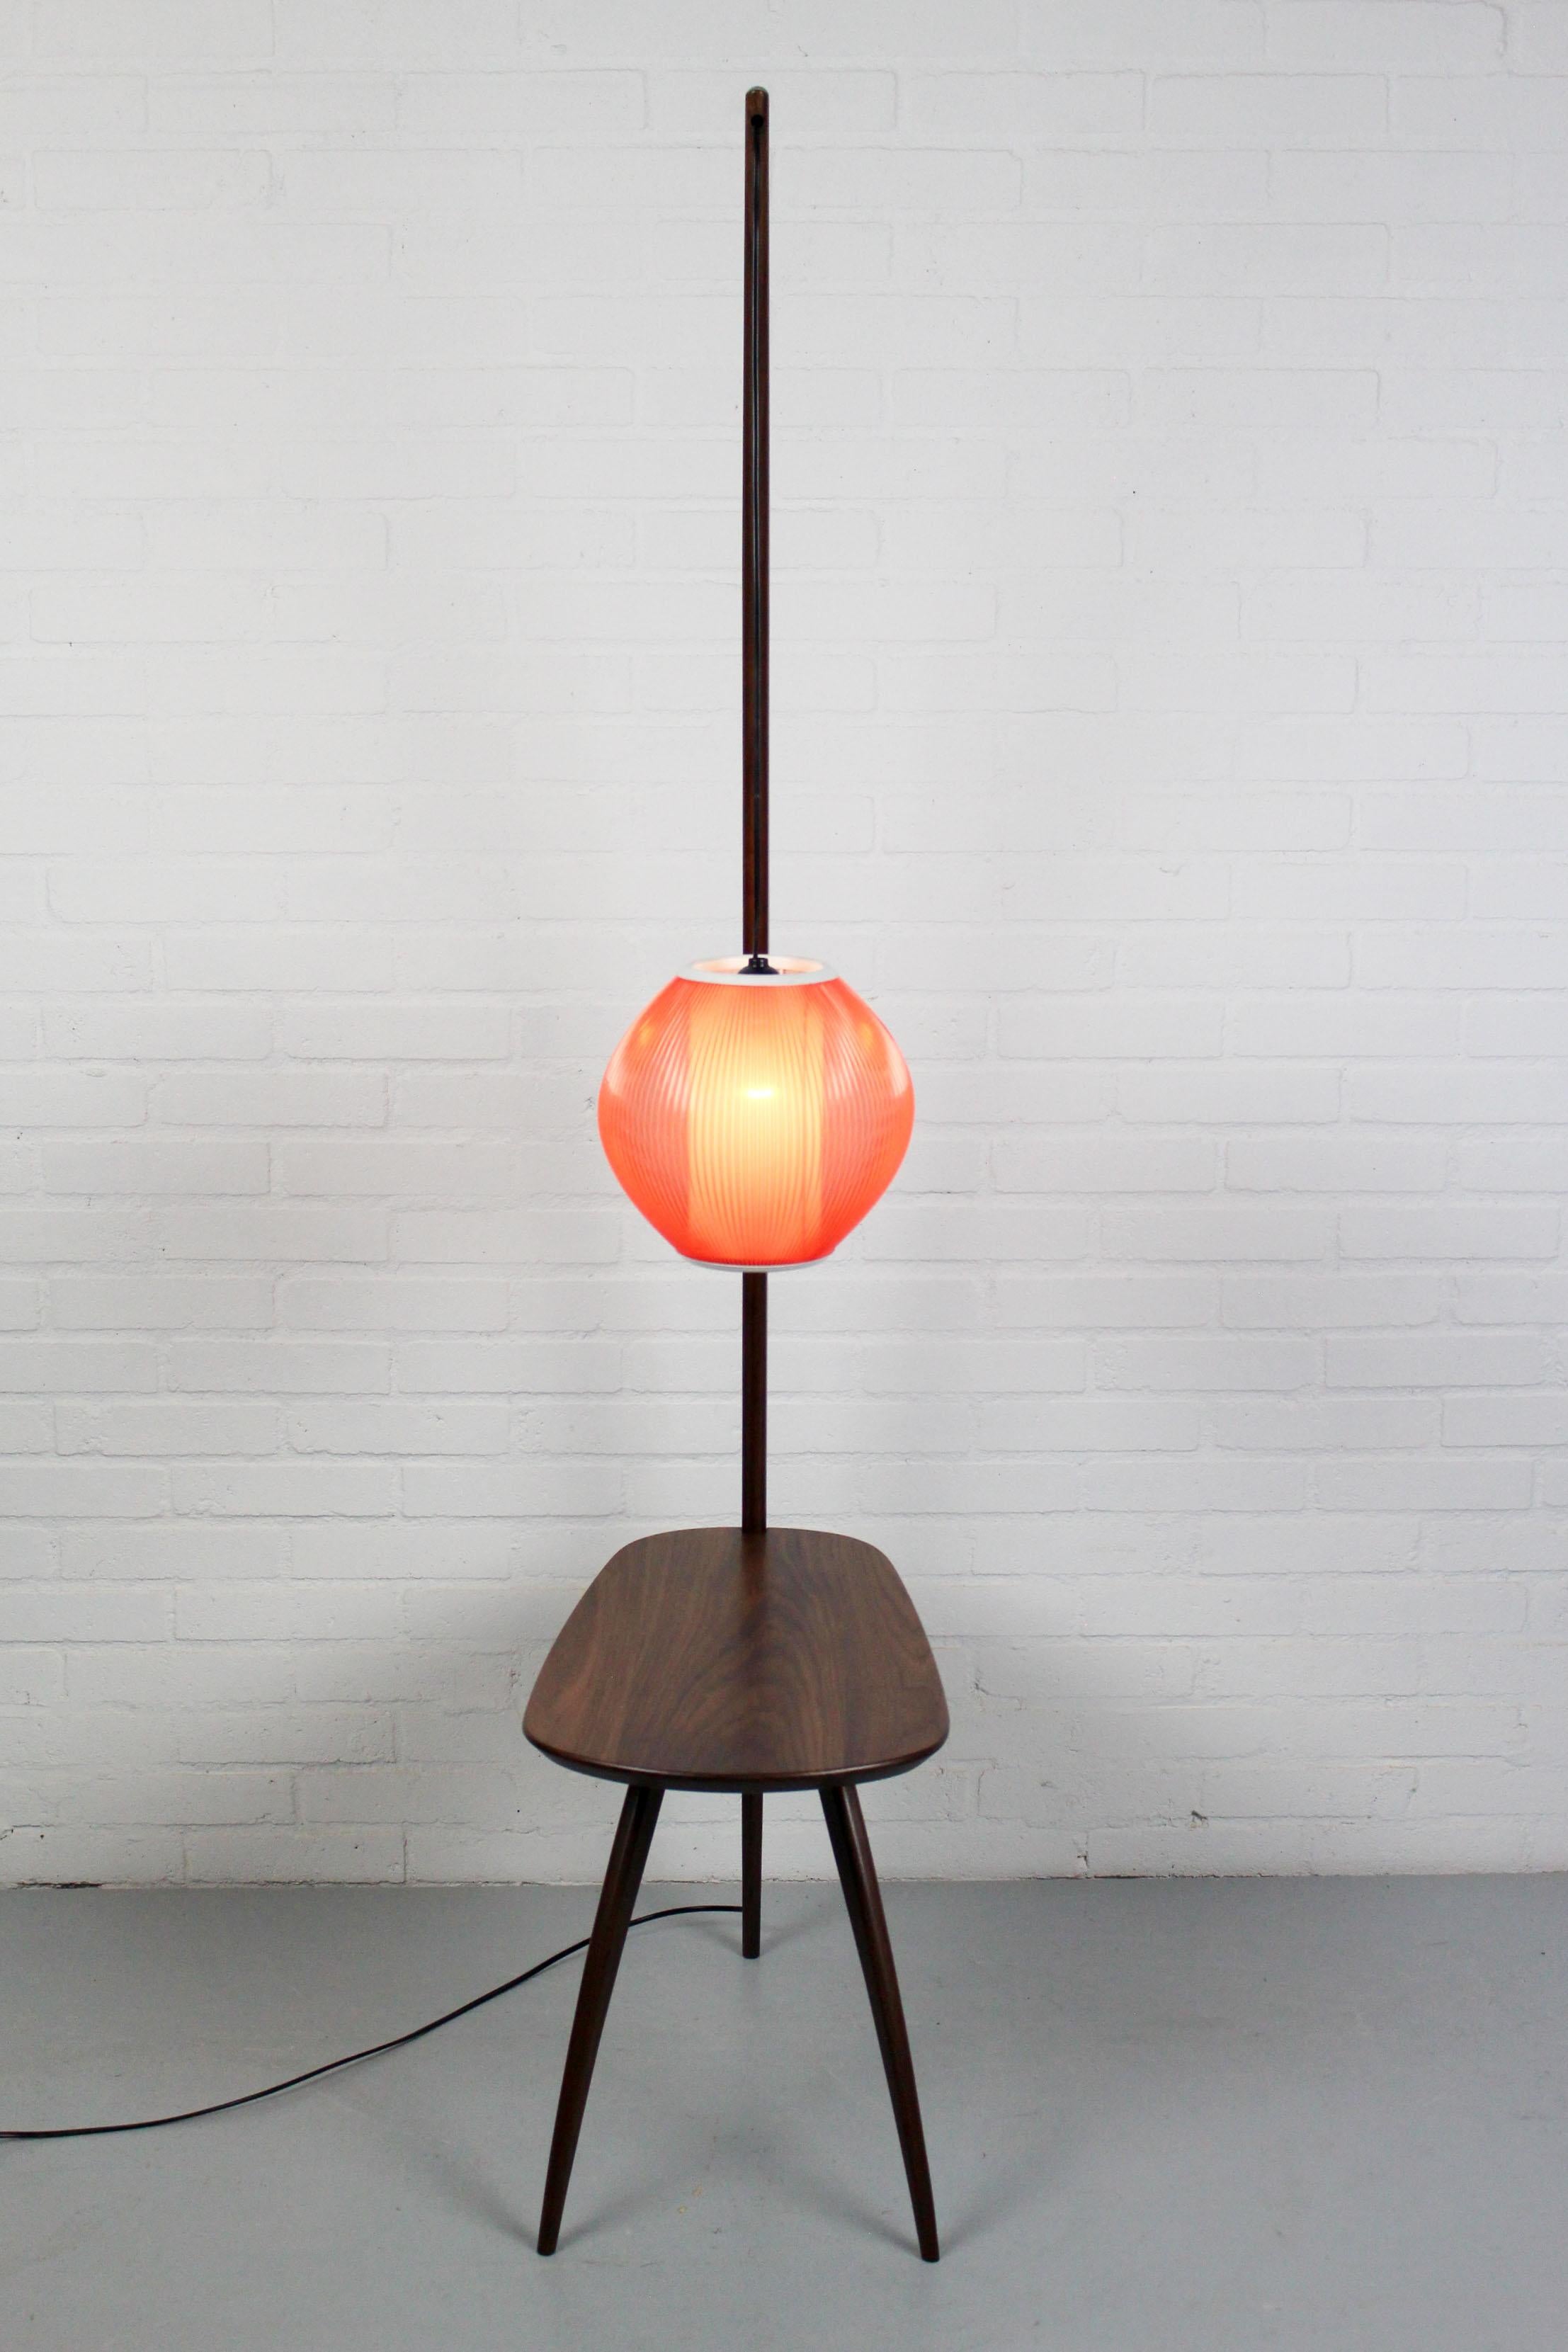 Plastic Mid-Century Modern Lampshade with American Nut Table